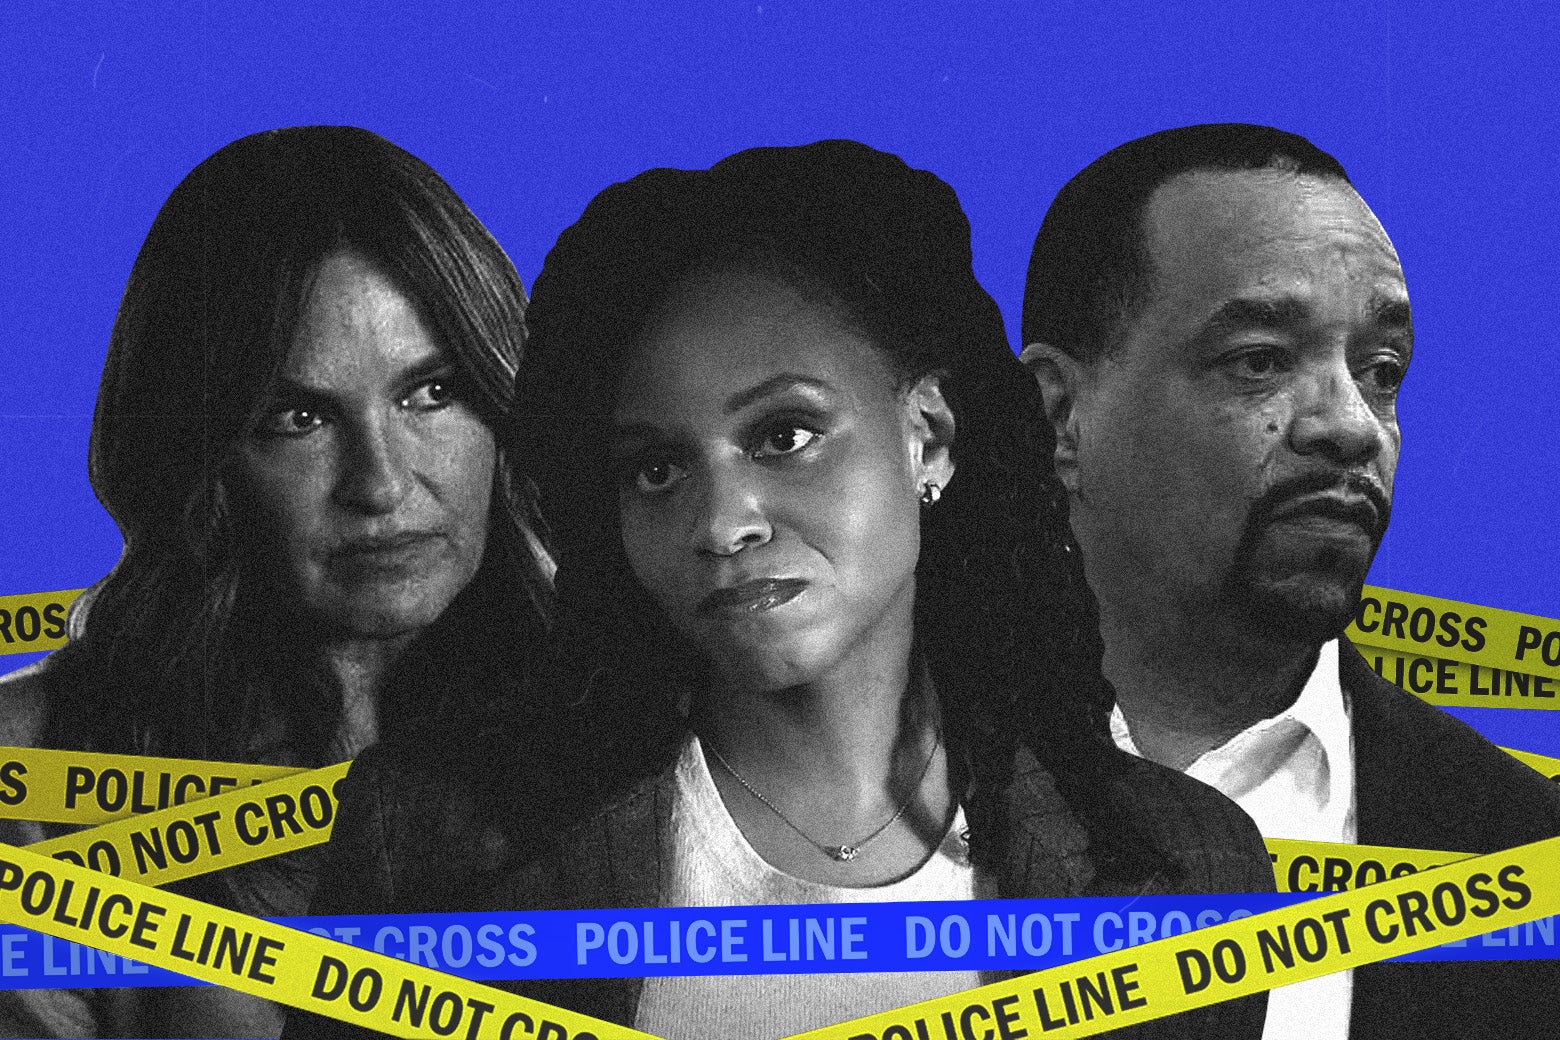 Mariska Hargitay, Ice-T, and Aime Donna Kelly in Law & Order: SVU, against a blue background, with police tape in the foreground.